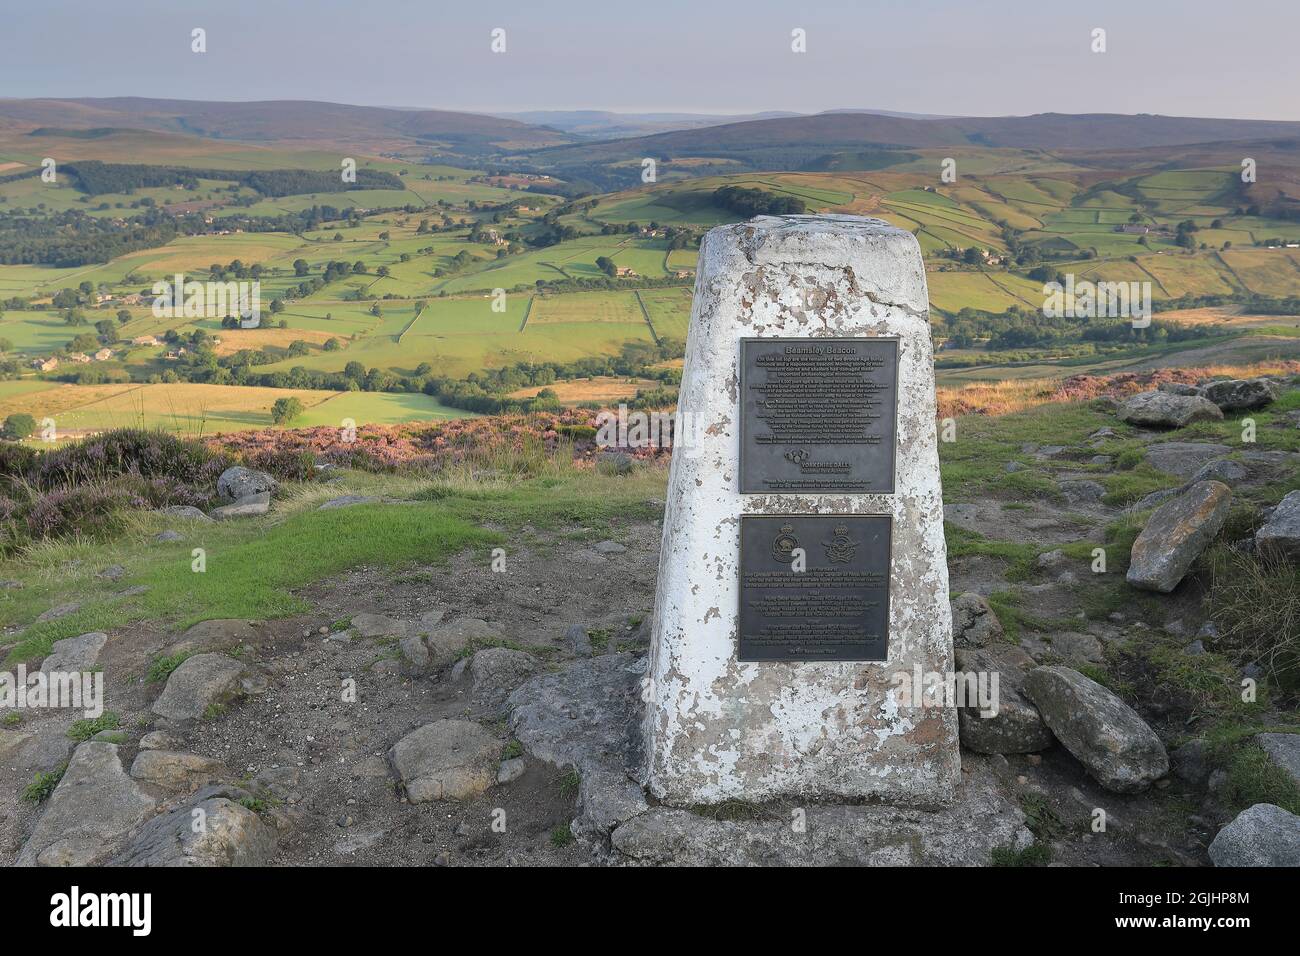 Trig point on the summit of Beamsley Beacon, a hill in Wharfedale, Yorkshire Dales National Park, UK Stock Photo